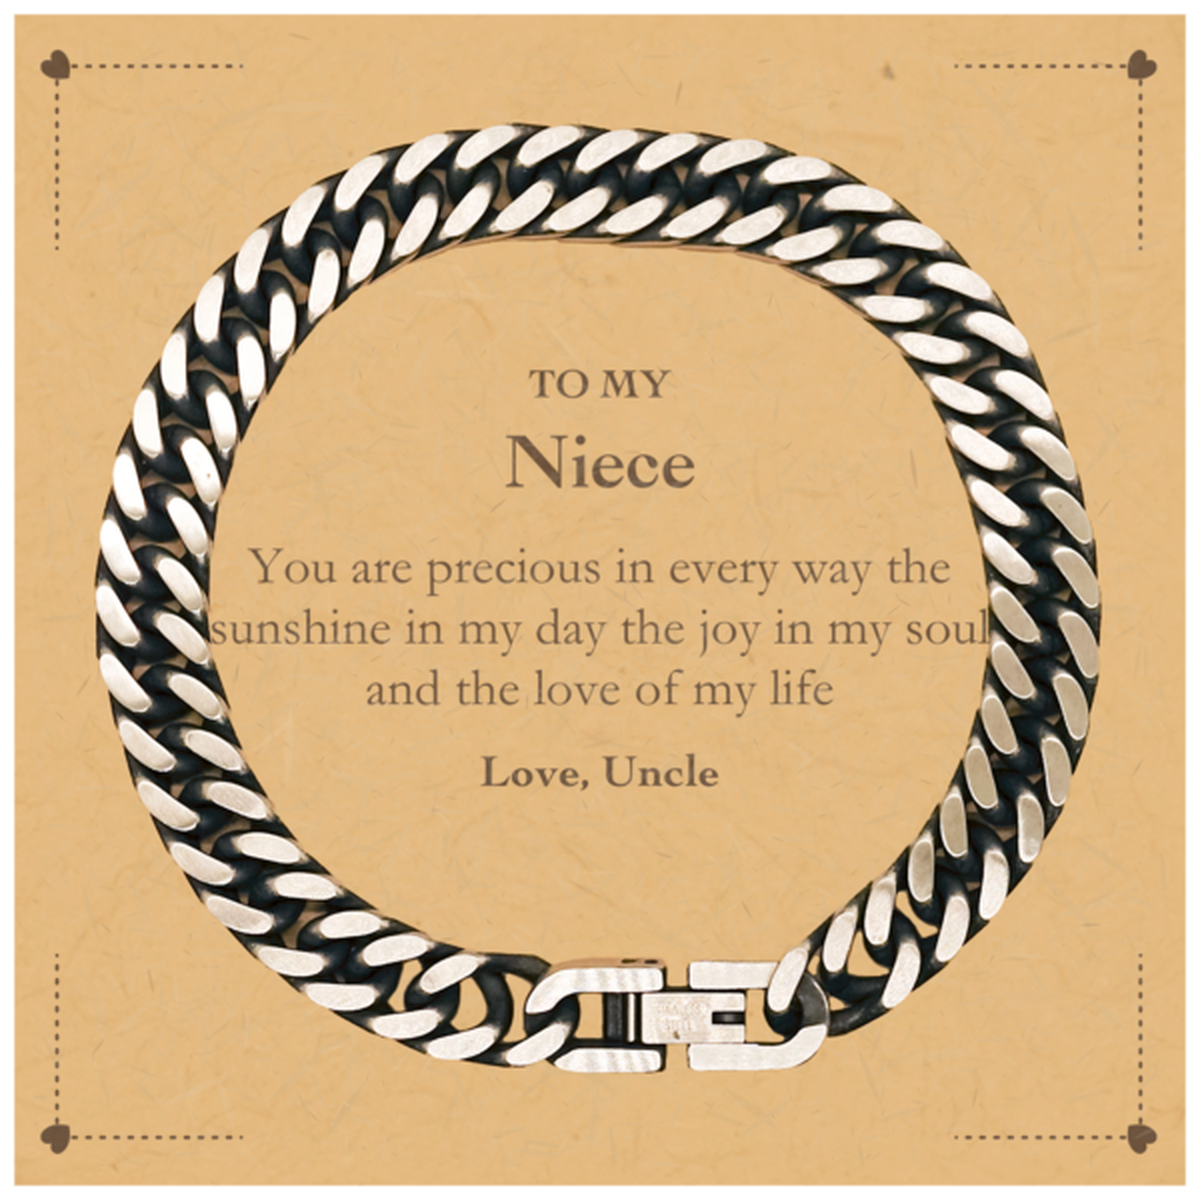 Graduation Gifts for Niece Cuban Link Chain Bracelet Present from Uncle, Christmas Niece Birthday Gifts Niece You are precious in every way the sunshine in my day. Love, Uncle